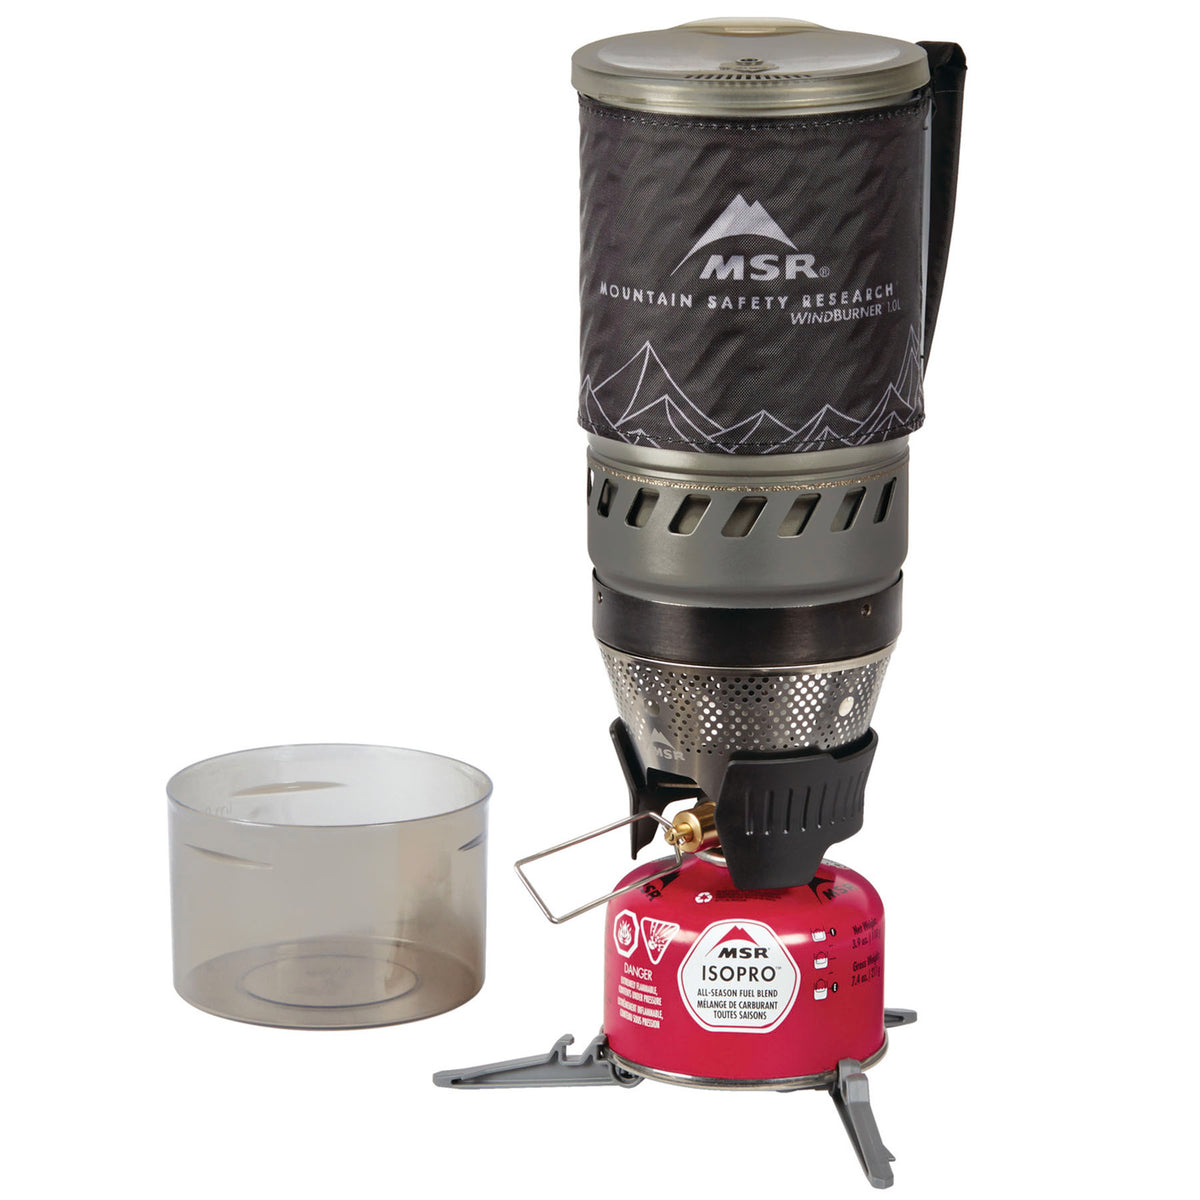 the msr windburner stove set up with the pot on it and a fuel canister, not included